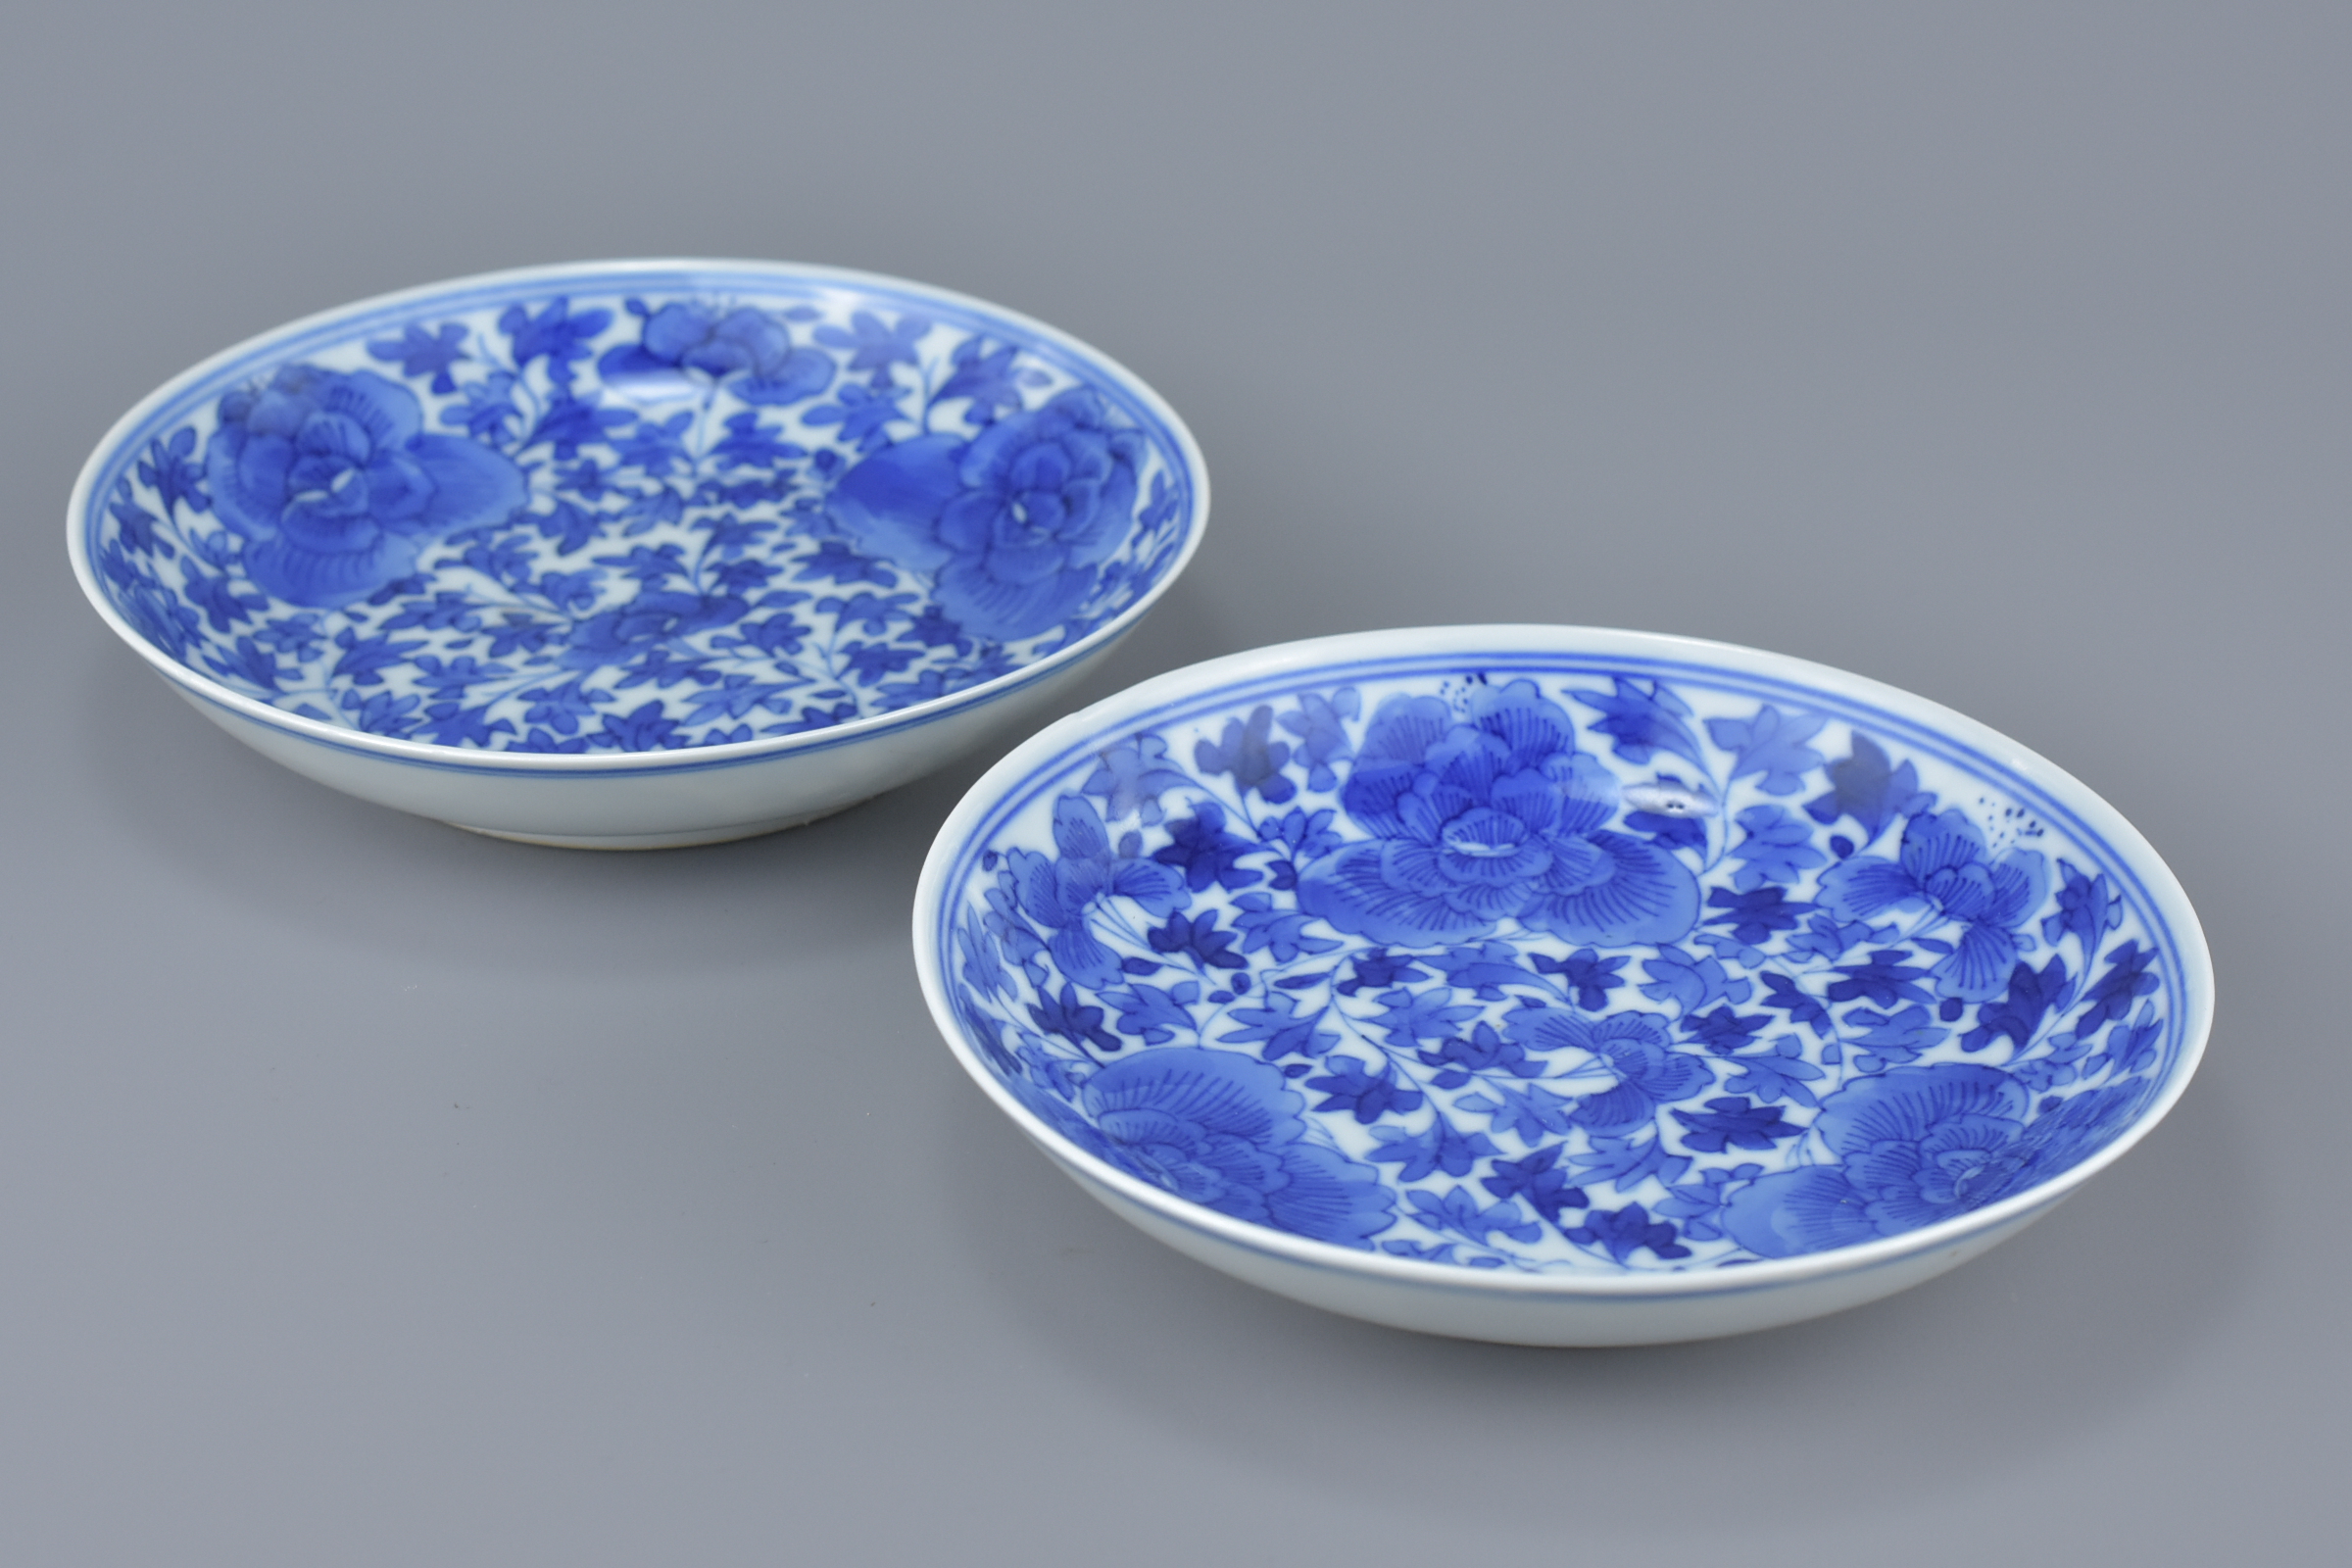 Pair of 19th century Chinese Porcelain Blue and White Saucers with four character hallmark and Wooll - Image 2 of 7